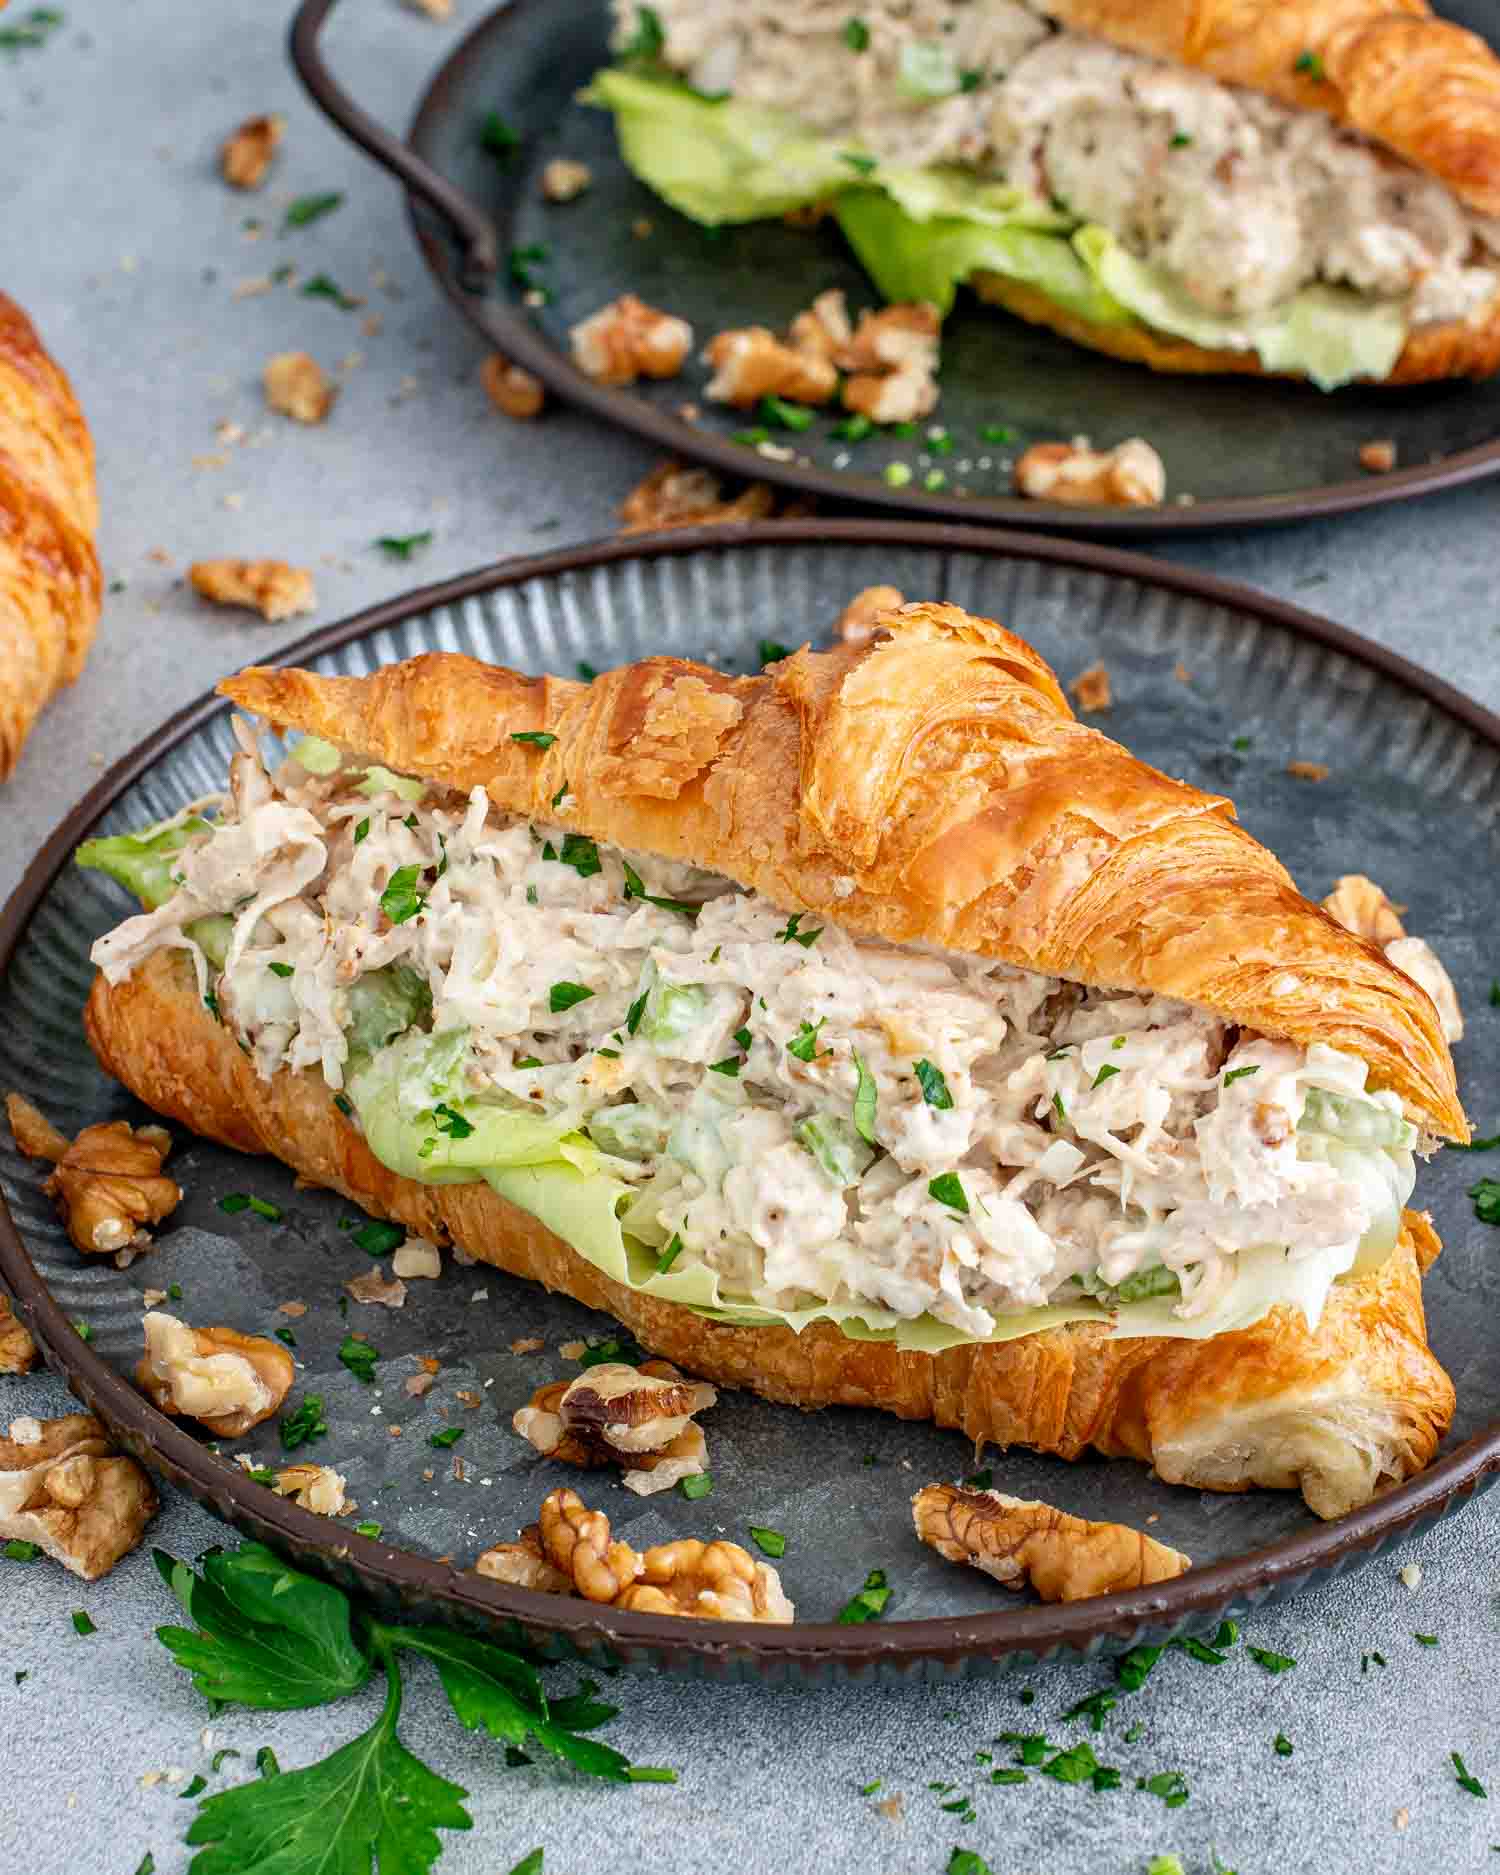 a chicken salad croissant sandwich on a plate garnished with a few walnuts.